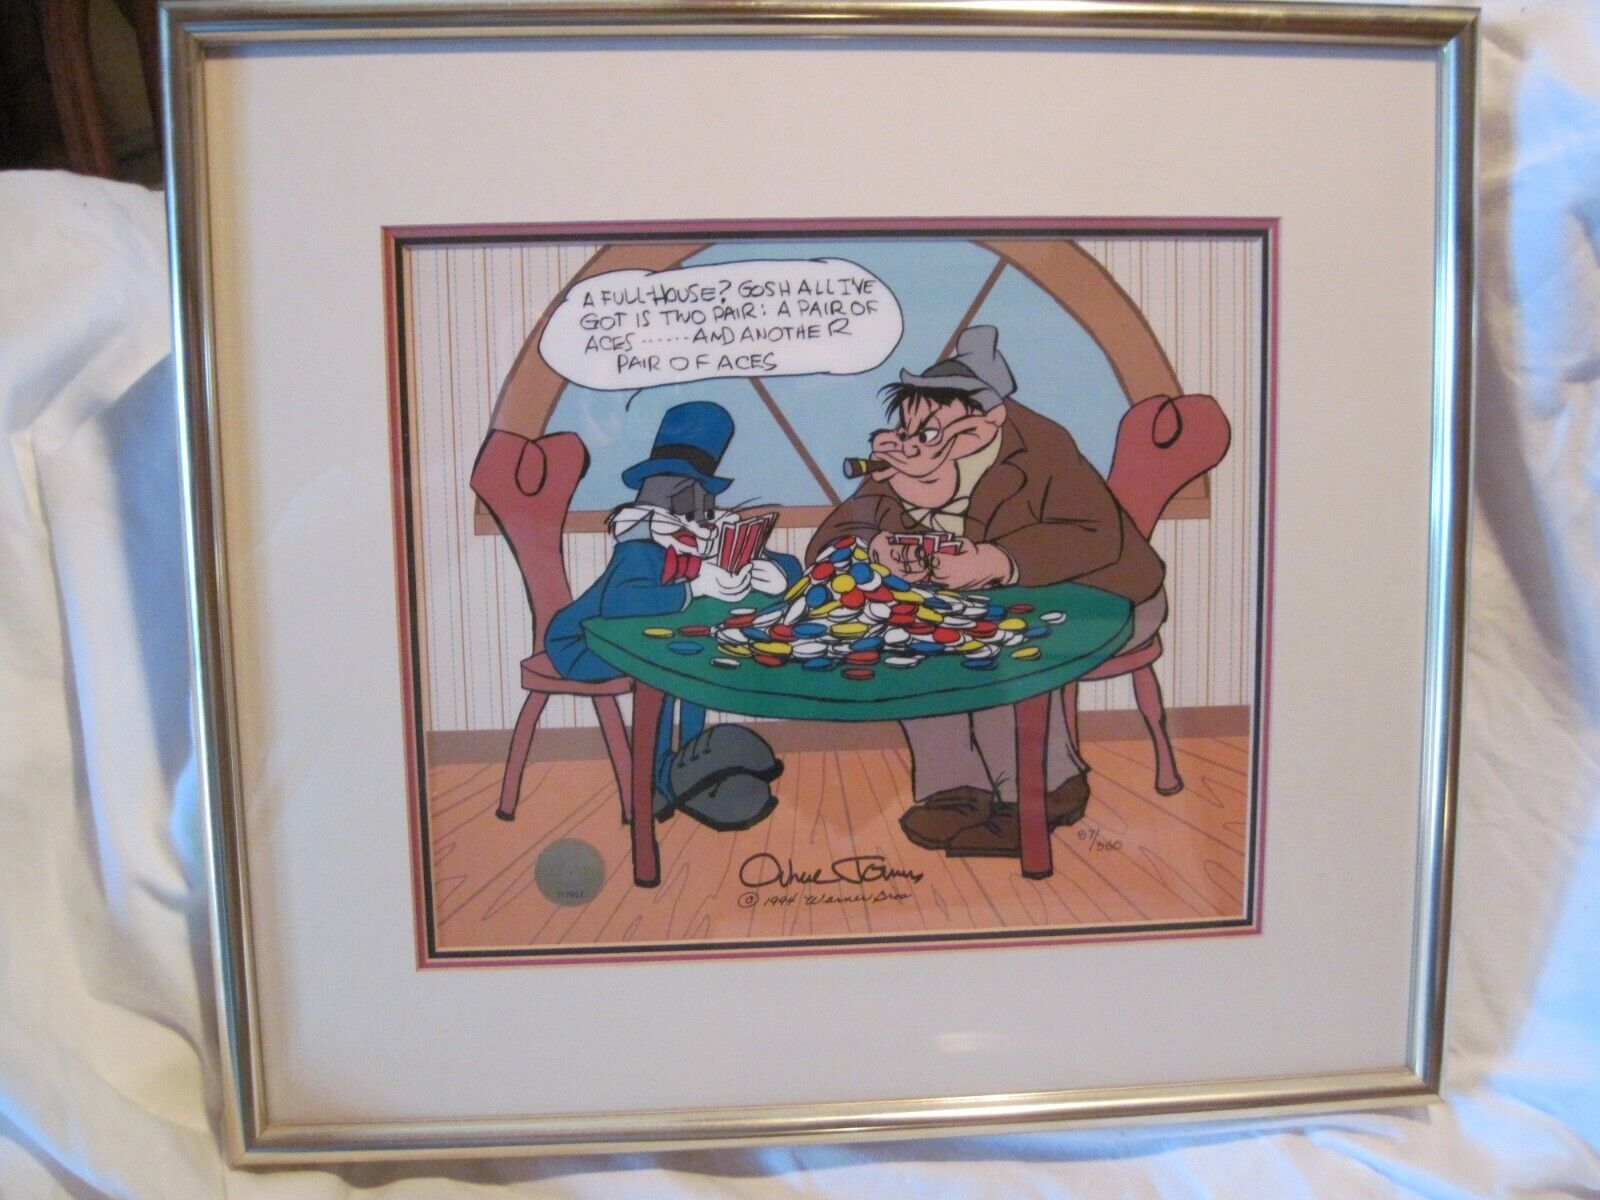 CHUCK JONES BUGS BUNNY TWO PAIR HARE 1994 FRAMED SIGNED LE HAND PAINTED CEL